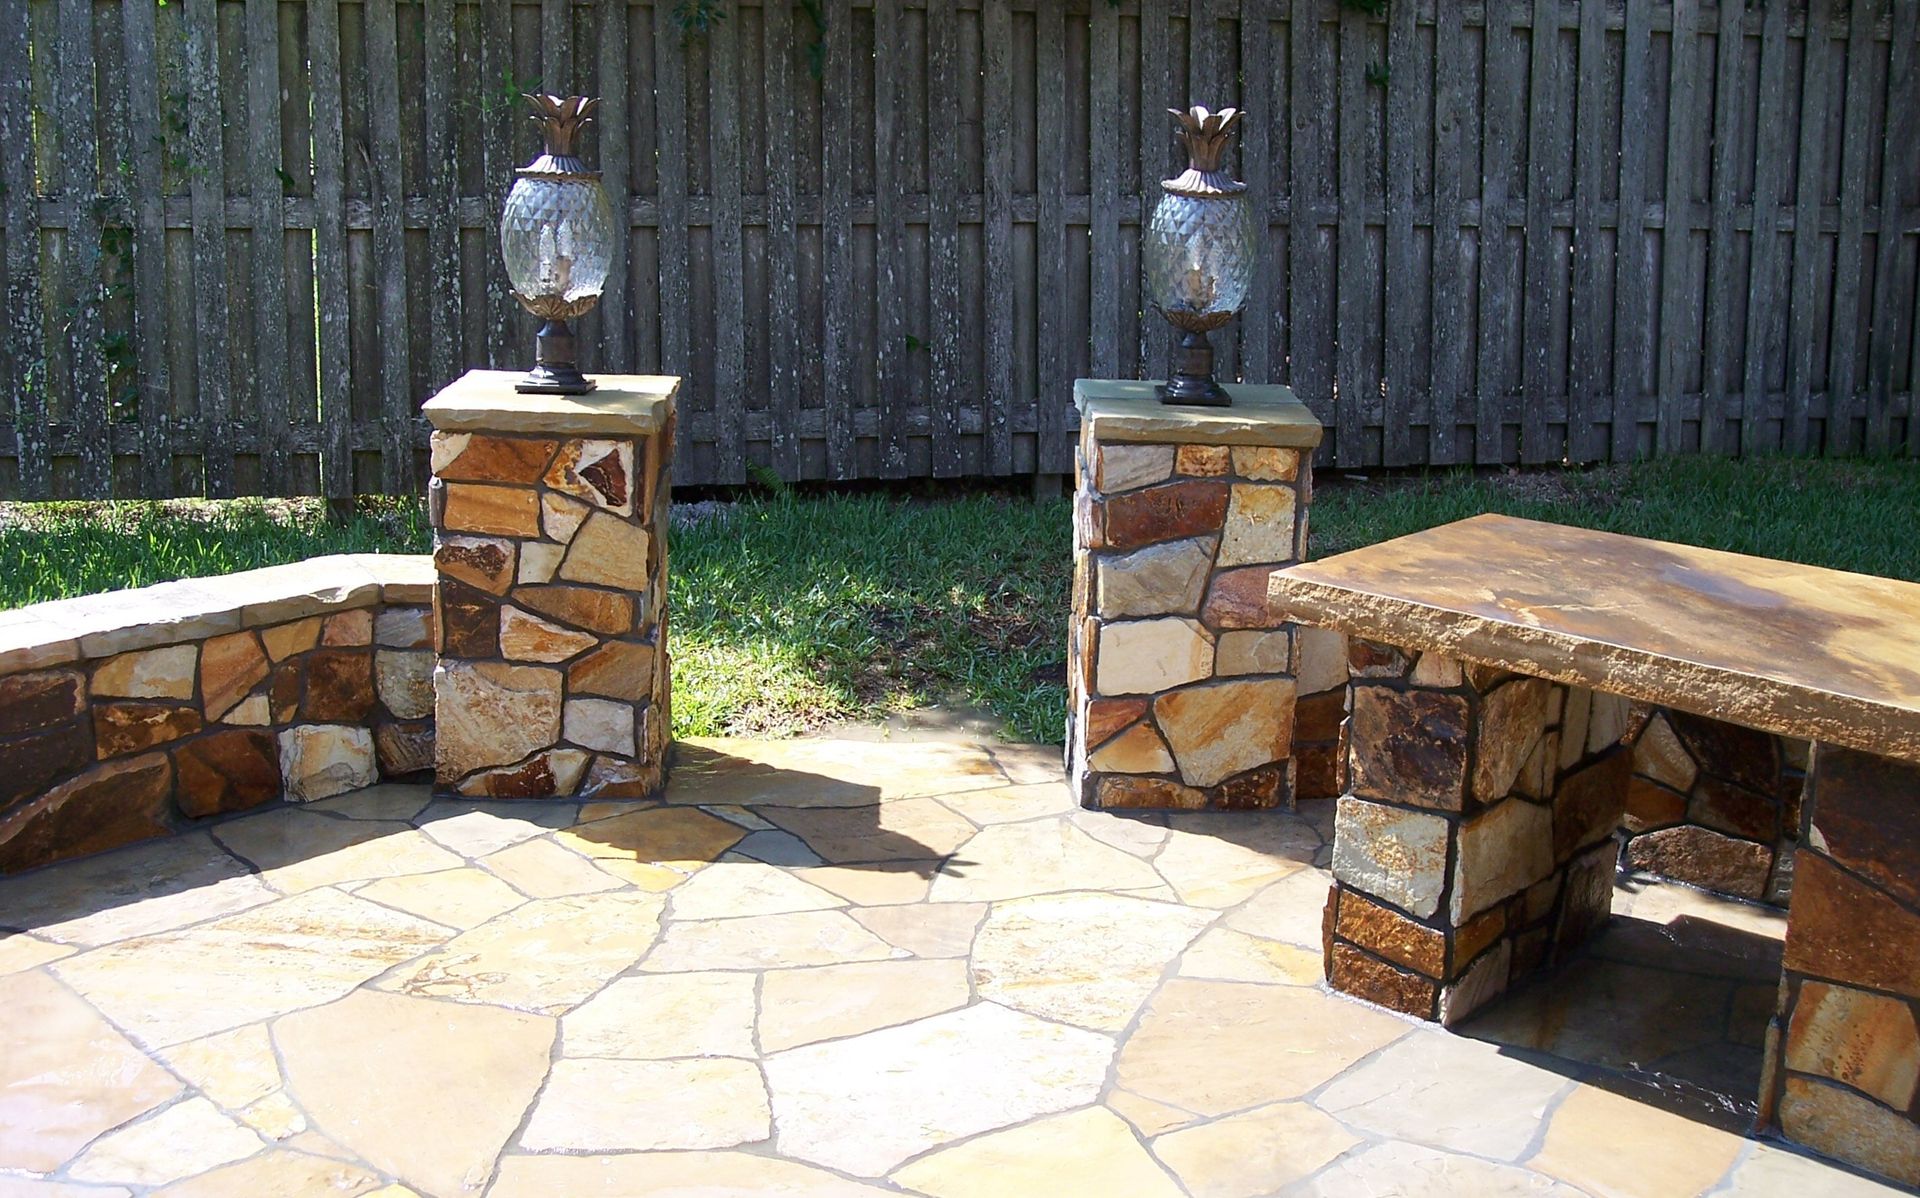 flagstone patio, flagstone steps, stone wall, stone retaining wall, stone baluster, hardscape, paver, stone pavers, stone, decorative stone, patio, paver patio, stone paver patio, walkway, paver walkway, stone walkway, walkway stones, stone paver walkway, garden stones, walkway stones, garden walkway, paver landscaping, stone steps, paver steps, pool deck, paver pool deck, paver pool decking, pool coping, natural stone, stone, stacked stone, veneer, stone veneer, flagstone, bluestone, thermal bluestone, spa design, pool deck design, outdoor kitchen, summer kitchen, fire pit, firepit, sitting wall, pergola, hand-made pergola, seating area, outdoor living, outdoor entertaining, paver contractor, paver design, paver install, paver installation, paver expert, paver experts, warranty, labor warranty, expert installation, expert install, licensed and insured, licensed, insured, licensed insured, award winning designs, Angie's List Super Service Award, Angie's List Award, customer reviews, excellent reputation, reputation, fireplace, fireplace renovation, stone fireplace, fireplace veneer, fireplace reconstruction, before and after pictures, years experience, experienced, Jacksonville, Ponte Vedra, Nocatee, Fleming Island, Queens Harbor, St. Johns, Fruit Cove, St. Augustine, Jacksonville pavers, paver driveway Jacksonville, Jacksonville paver driveway, Jacksonville driveway, paver patio Jacksonville, patio Jacksonville, Jacksonville paver patio, Jacksonville patio, Ponte Vedra pavers, paver driveway Ponte Vedra, driveway Ponte Vedra, Ponte Vedra paver driveway, Ponte Vedra driveway, paver patio Ponte Vedra, patio Ponte Vedra, Ponte Vedra paver patio, Ponte Vedra patio, Nocatee pavers, driveway Nocatee, paver driveway Nocatee, Nocatee driveway, Nocatee paver driveway, paver patio Nocatee, patio Nocatee, Nocatee paver patio, Nocatee patio, Sawgrass pavers, Sawgrass paver driveway, Sawgrass driveway, driveway Sawgrass, paver driveway Sawgrass, paver patio Sawgrass, patio Sawgrass, Sawgrass patio, Sawgrass paver patio, Fleming Island pavers, Fleming Island paver driveway, paver driveway Fleming Island, Fleming Island driveway, driveway Fleming Island, paver patio Fleming Island, Fleming Island paver patio, patio Fleming Island, Fleming Island patio, Queens Harbor pavers, paver driveway Queens Harbor, Queens Harbor paver driveway, Queens Harbor driveway, driveway Queens Harbor, paver patio Queens Harbor, Queens Harbor paver patio, patio Queens Harbor, Queens Harbor patio, St. Johns pavers, St. Johns paver driveway, paver driveway St. Johns, St. Johns driveway, driveway St. Johns, St. Johns paver patio, paver patio St. Johns, patio St. Johns, St. Johns patio, Fruit Cove pavers, paver driveway Fruit Cove, Fruit Cove paver driveway, driveway Fruit Cove, Fruit Cove driveway, Fruit Cove paver patio, paver patio Fruit Cove, patio Fruit Cove, Fruit Cove patio, St. Augustine pavers, paver driveway St. Augustine, St. Augustine paver driveway, driveway St. Augustine, St. Augustine driveway, St. Augustine patio, patio St Augustine, St. Augustine paver patio, paver patio St. Augustine, Mandarin pavers, Mandarin paver driveway, paver driveway Mandarin, driveway Mandarin, Mandarin driveway, paver patio Mandarin, Mandarin paver patio, patio Mandarin, Mandarin patio, stone balusters, patio lanterns, lantern, patio lights, patio lighting system, stone bench